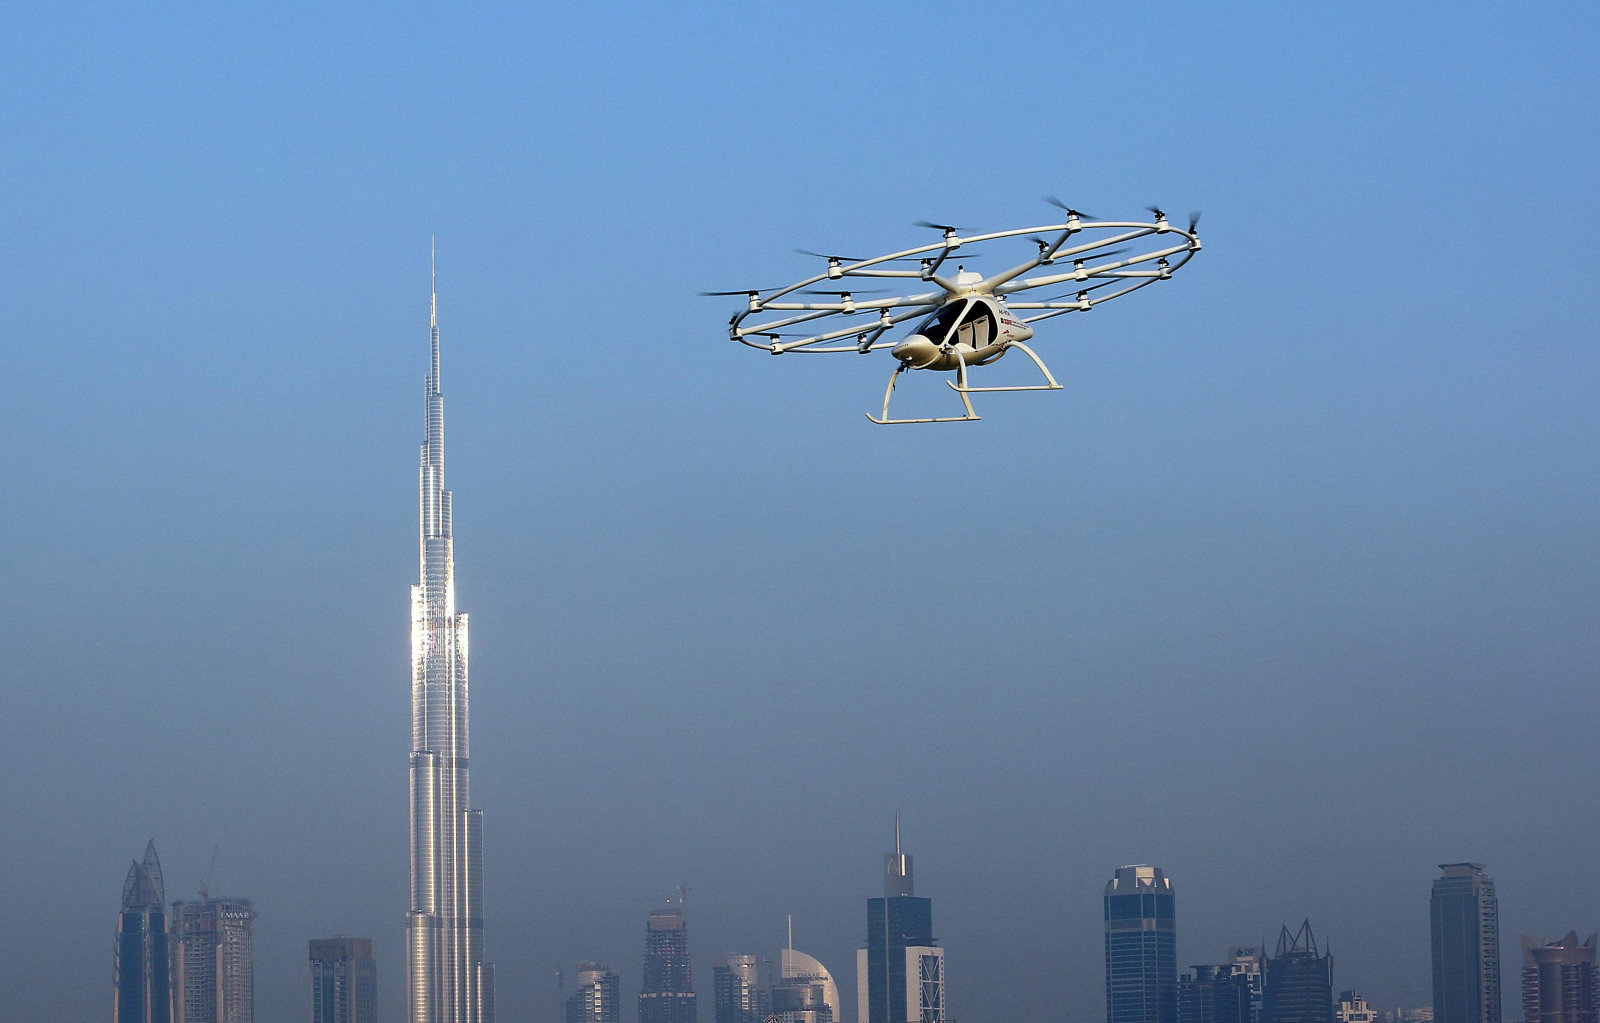 The flying taxi is seen in Dubai, United Arab Emirates September 25, 2017. REUTERS/Satish Kumar